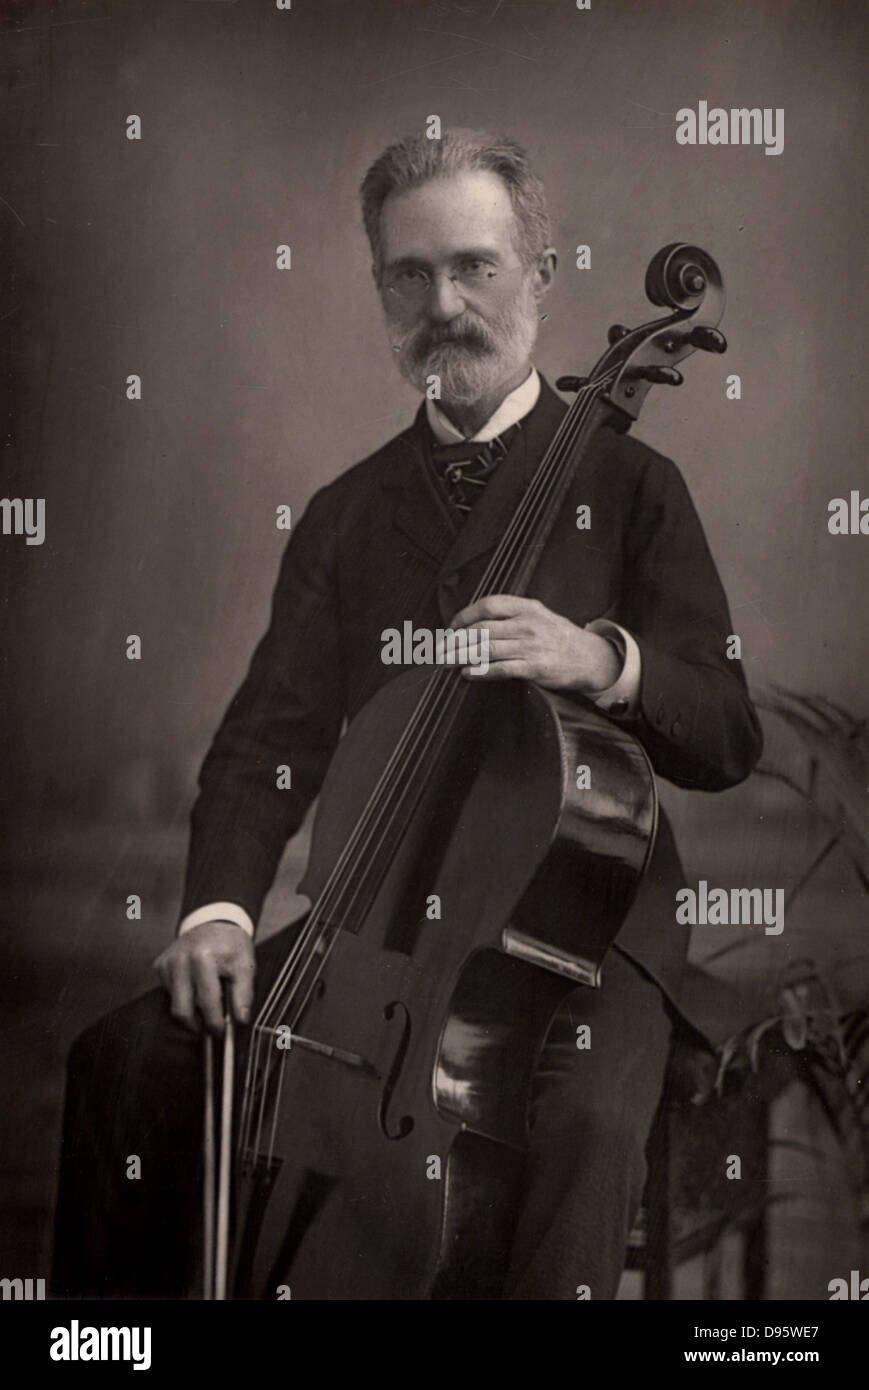 Alfredo Piatti (1822-1901) Italian cellist. From 'The Cabinet Portrait  Gallery' (London, 1890-1894). Woodburytype after photograph by W & D Downey  Stock Photo - Alamy